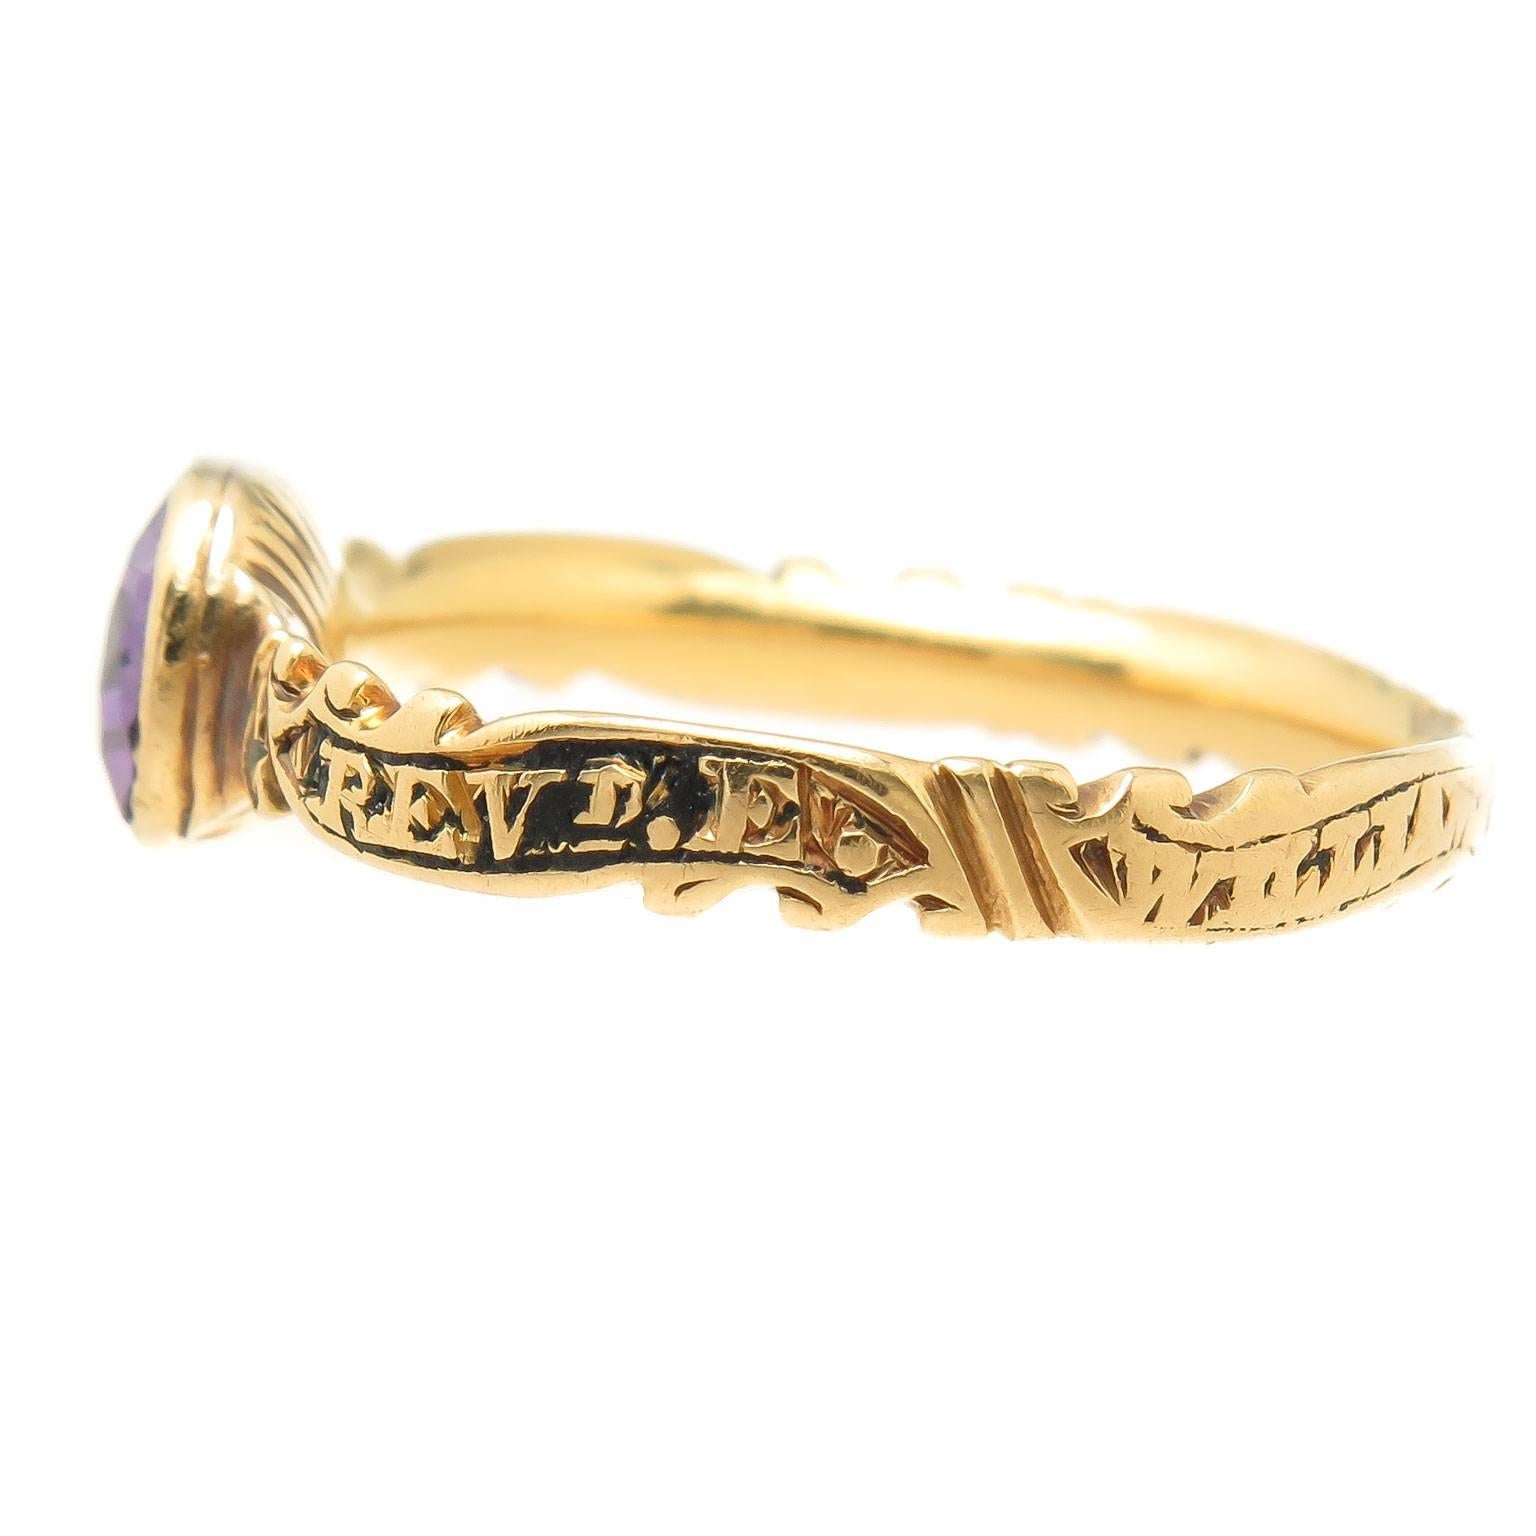 Circa 1763 Yellow Gold Memorial Ring, centrally set with an Amethyst and having Black Enamel. Engravings throughout the ring, some obscured with the dates clearly visible. The ring measures 1/8 inch wide and the finger size is 8 3/4. 